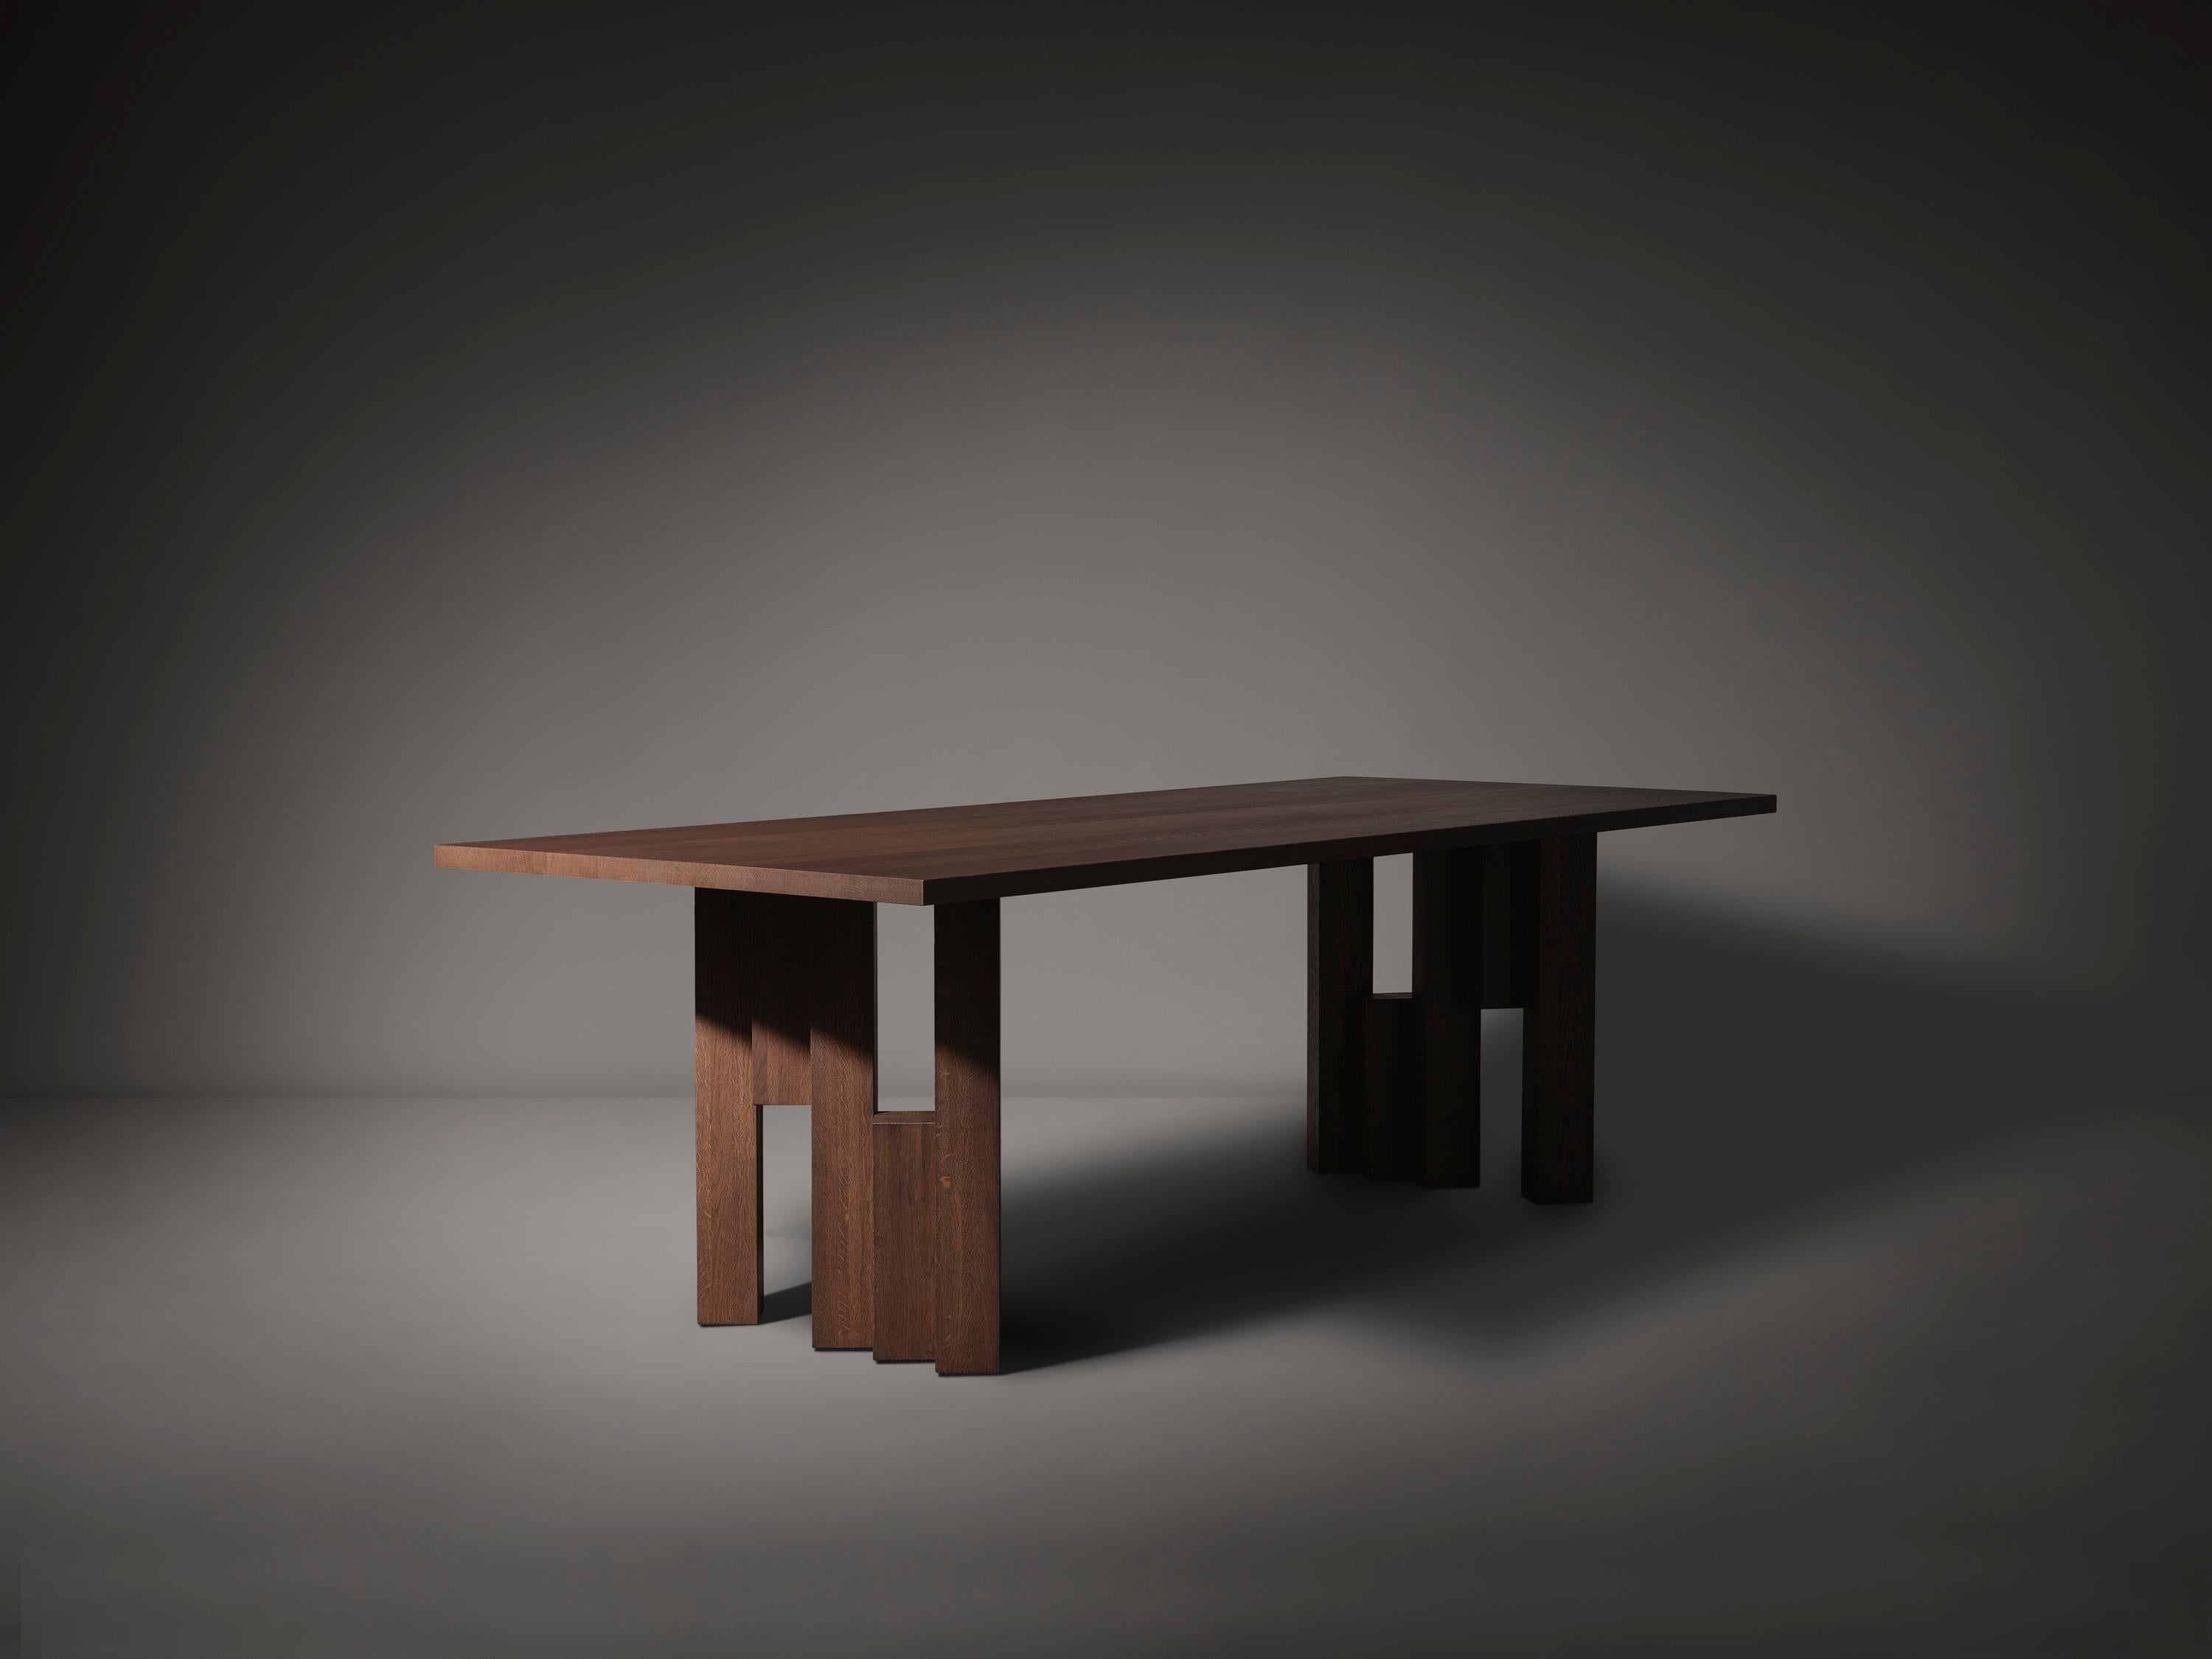 The Amsterdam School style inspired Fenestra table is crafted out of solid hardwood and made to measure. The design is inspired by Brick Expressionism, the architectural movement visible in Amsterdam’s ‘South Plan’ area - the city development plan